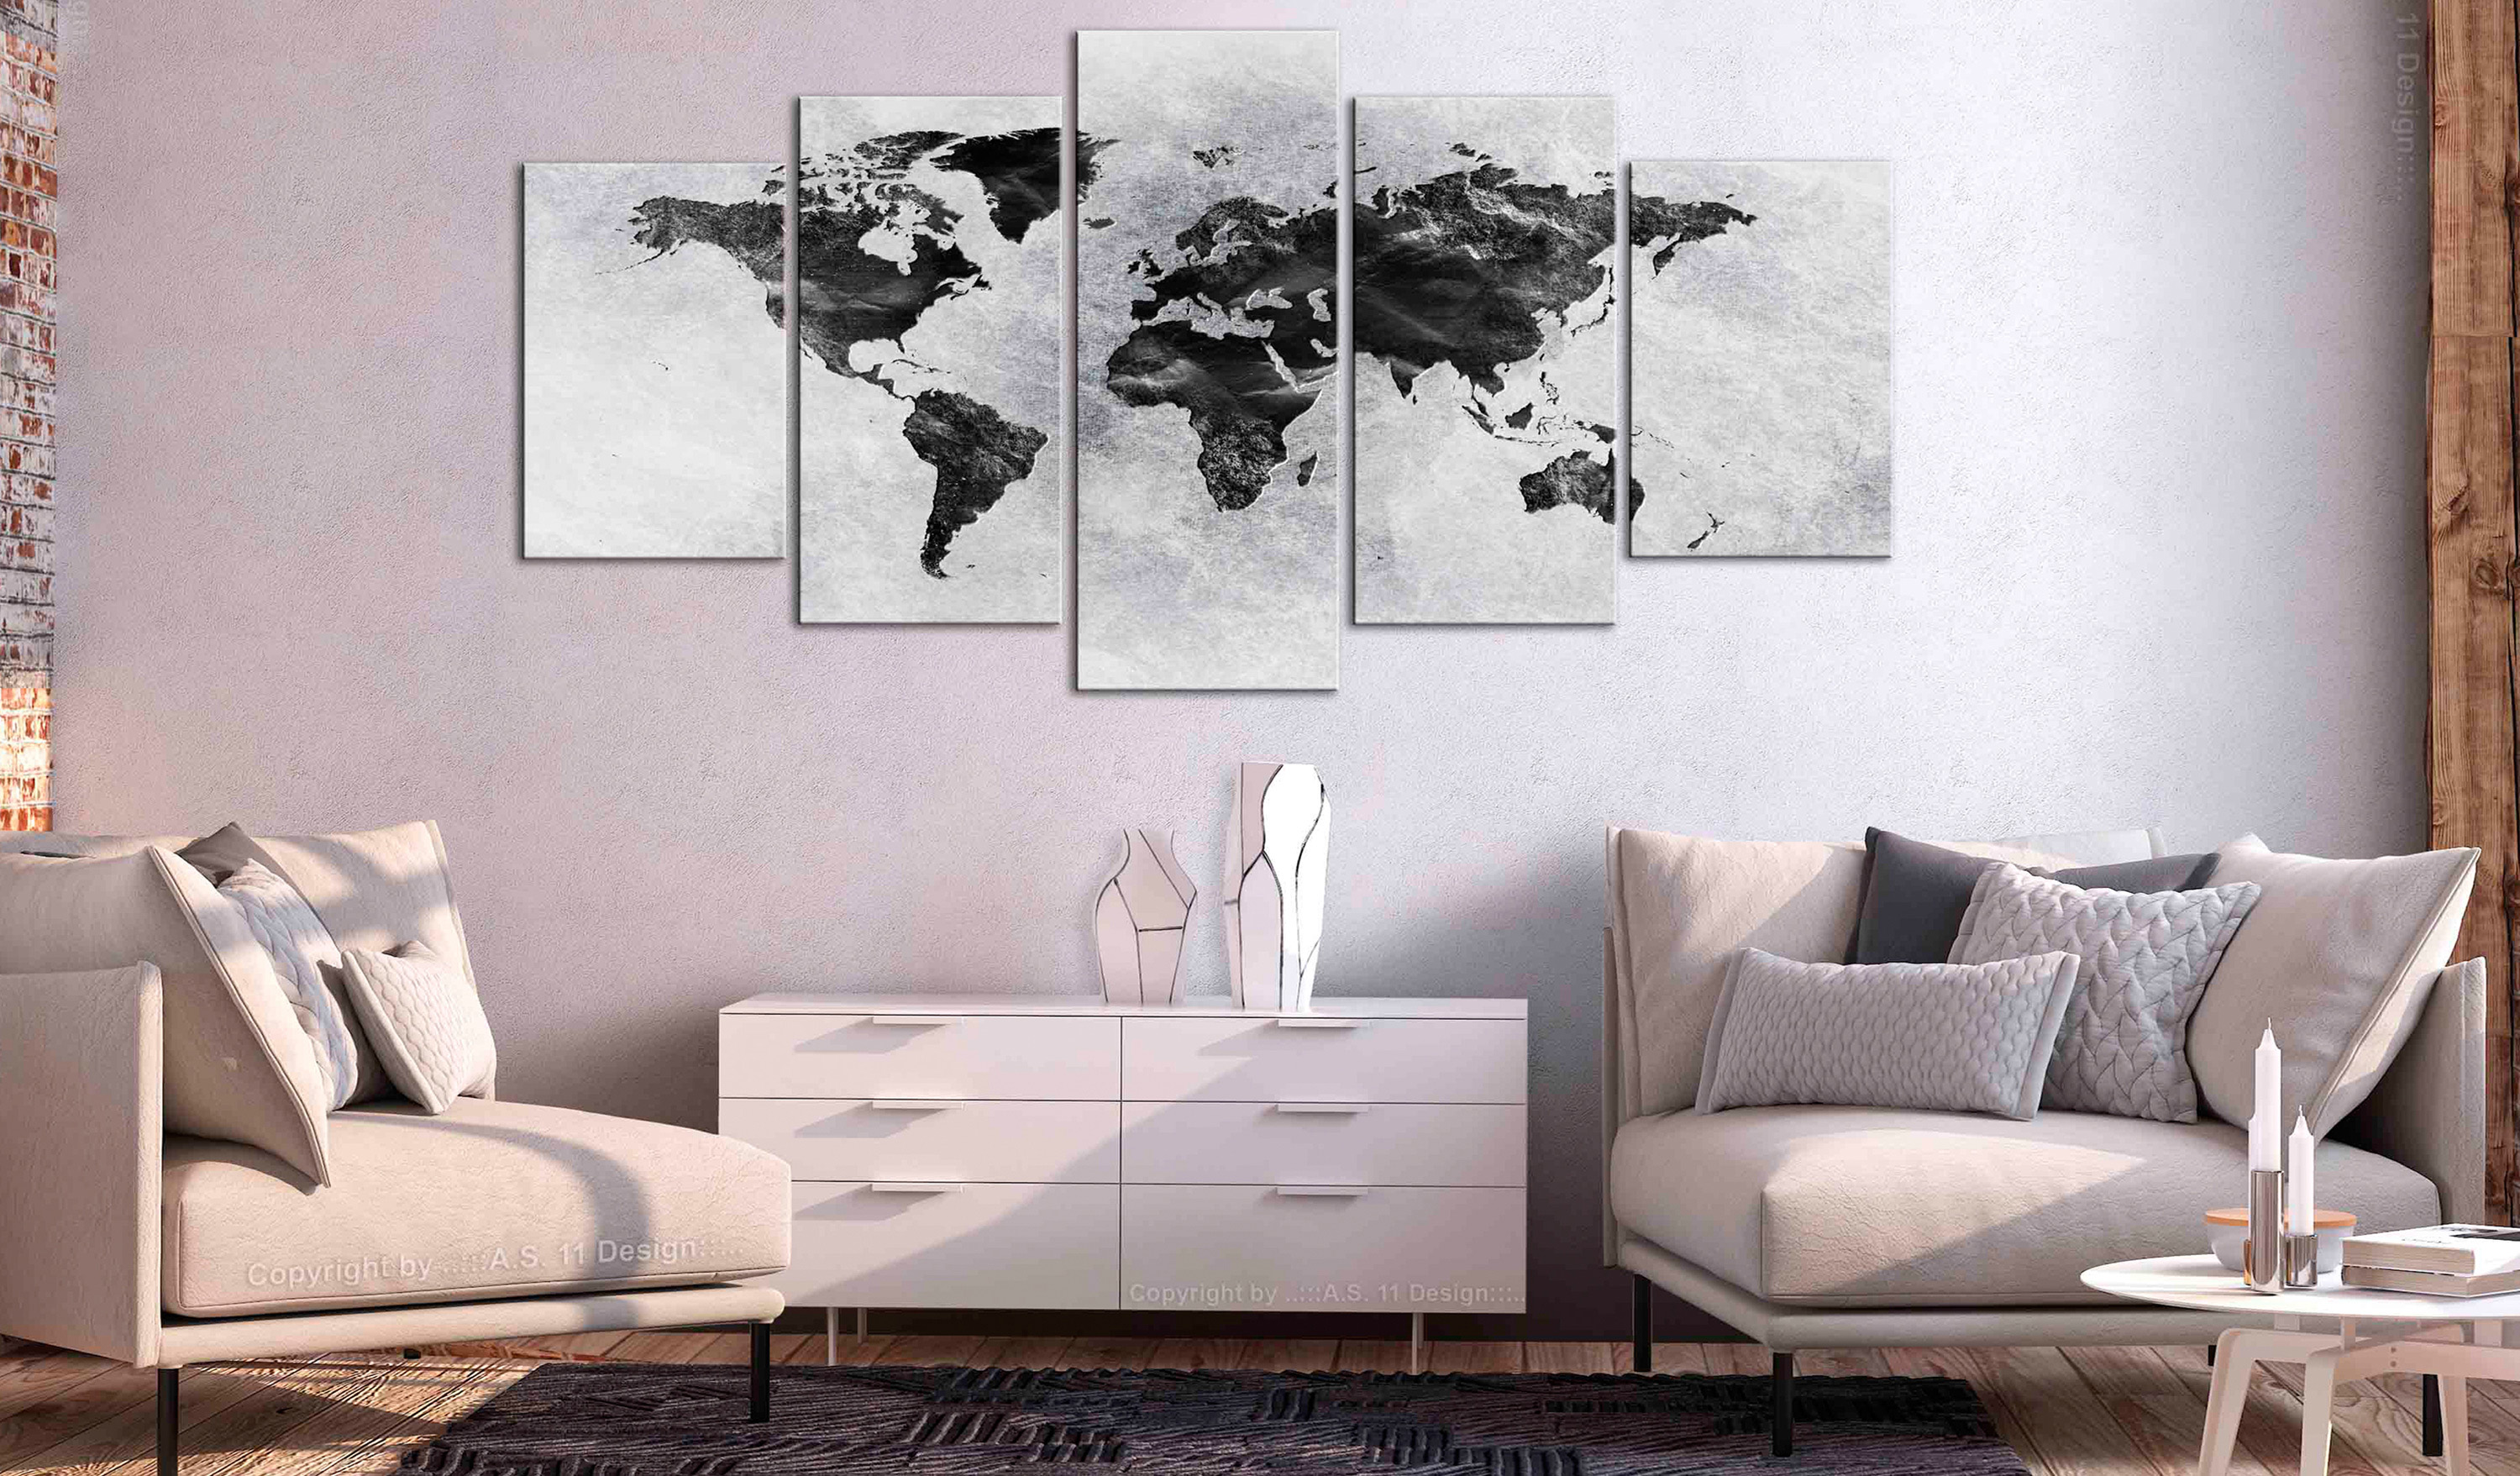 Glass Print Wall Art 125x50 cm Image on Glass Decorative Wall Picture 62695188 